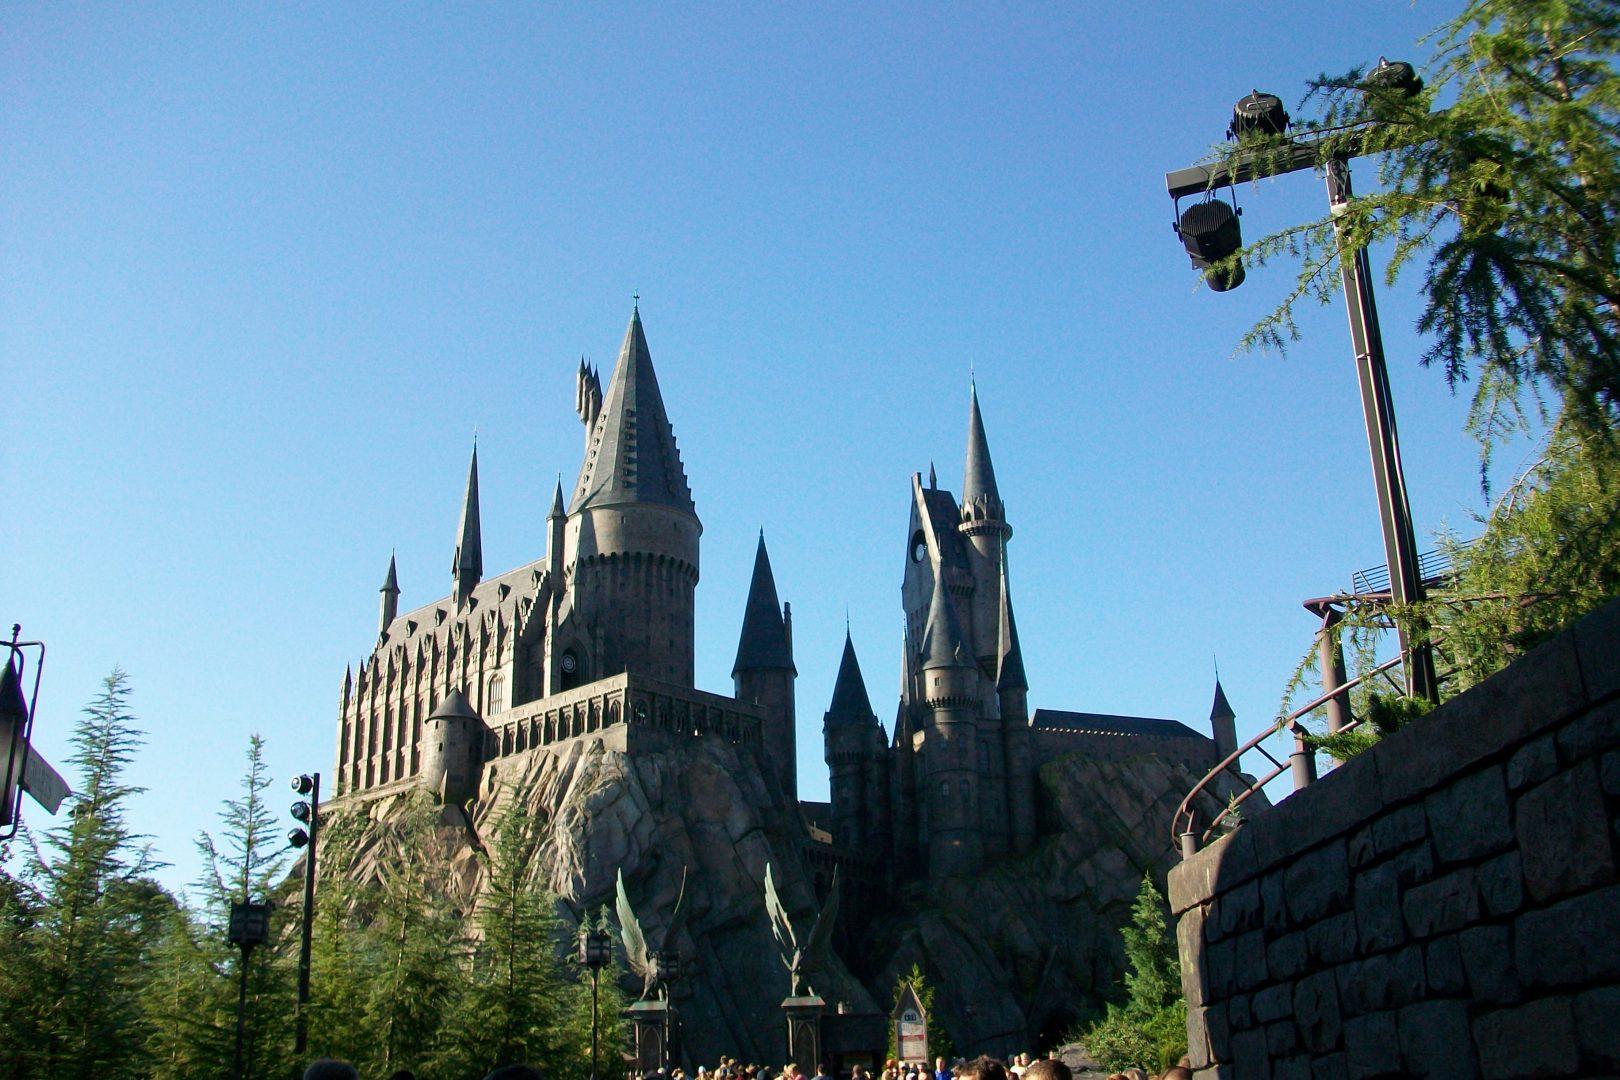 The Wizarding World of Harry Potter in Orlando, FL was a source of comfort for many Harry Potter fans after the conclusion of the film series. Fortunately, JK Rowling is rolling out a new Harry Potter-based film franchise.